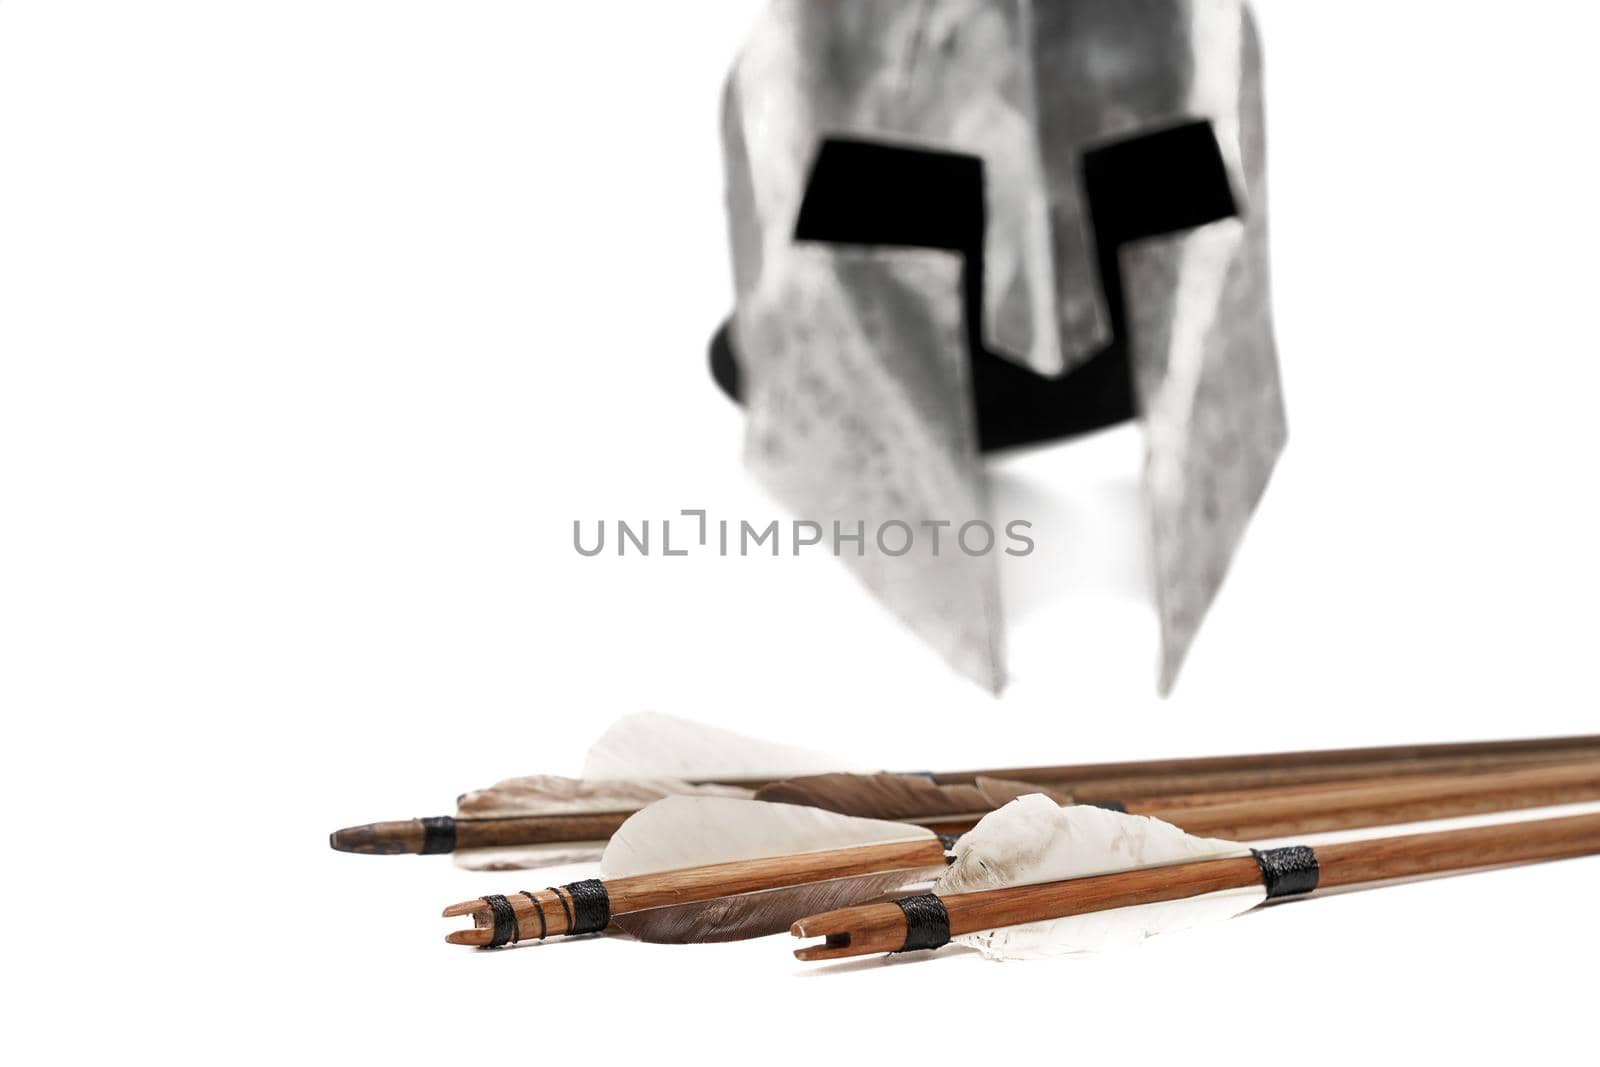 Close up cropped view of ancient metal silver helmet and wooden arrows with grey feathers isolated on white background. Medieval armour and old defensive weapon.